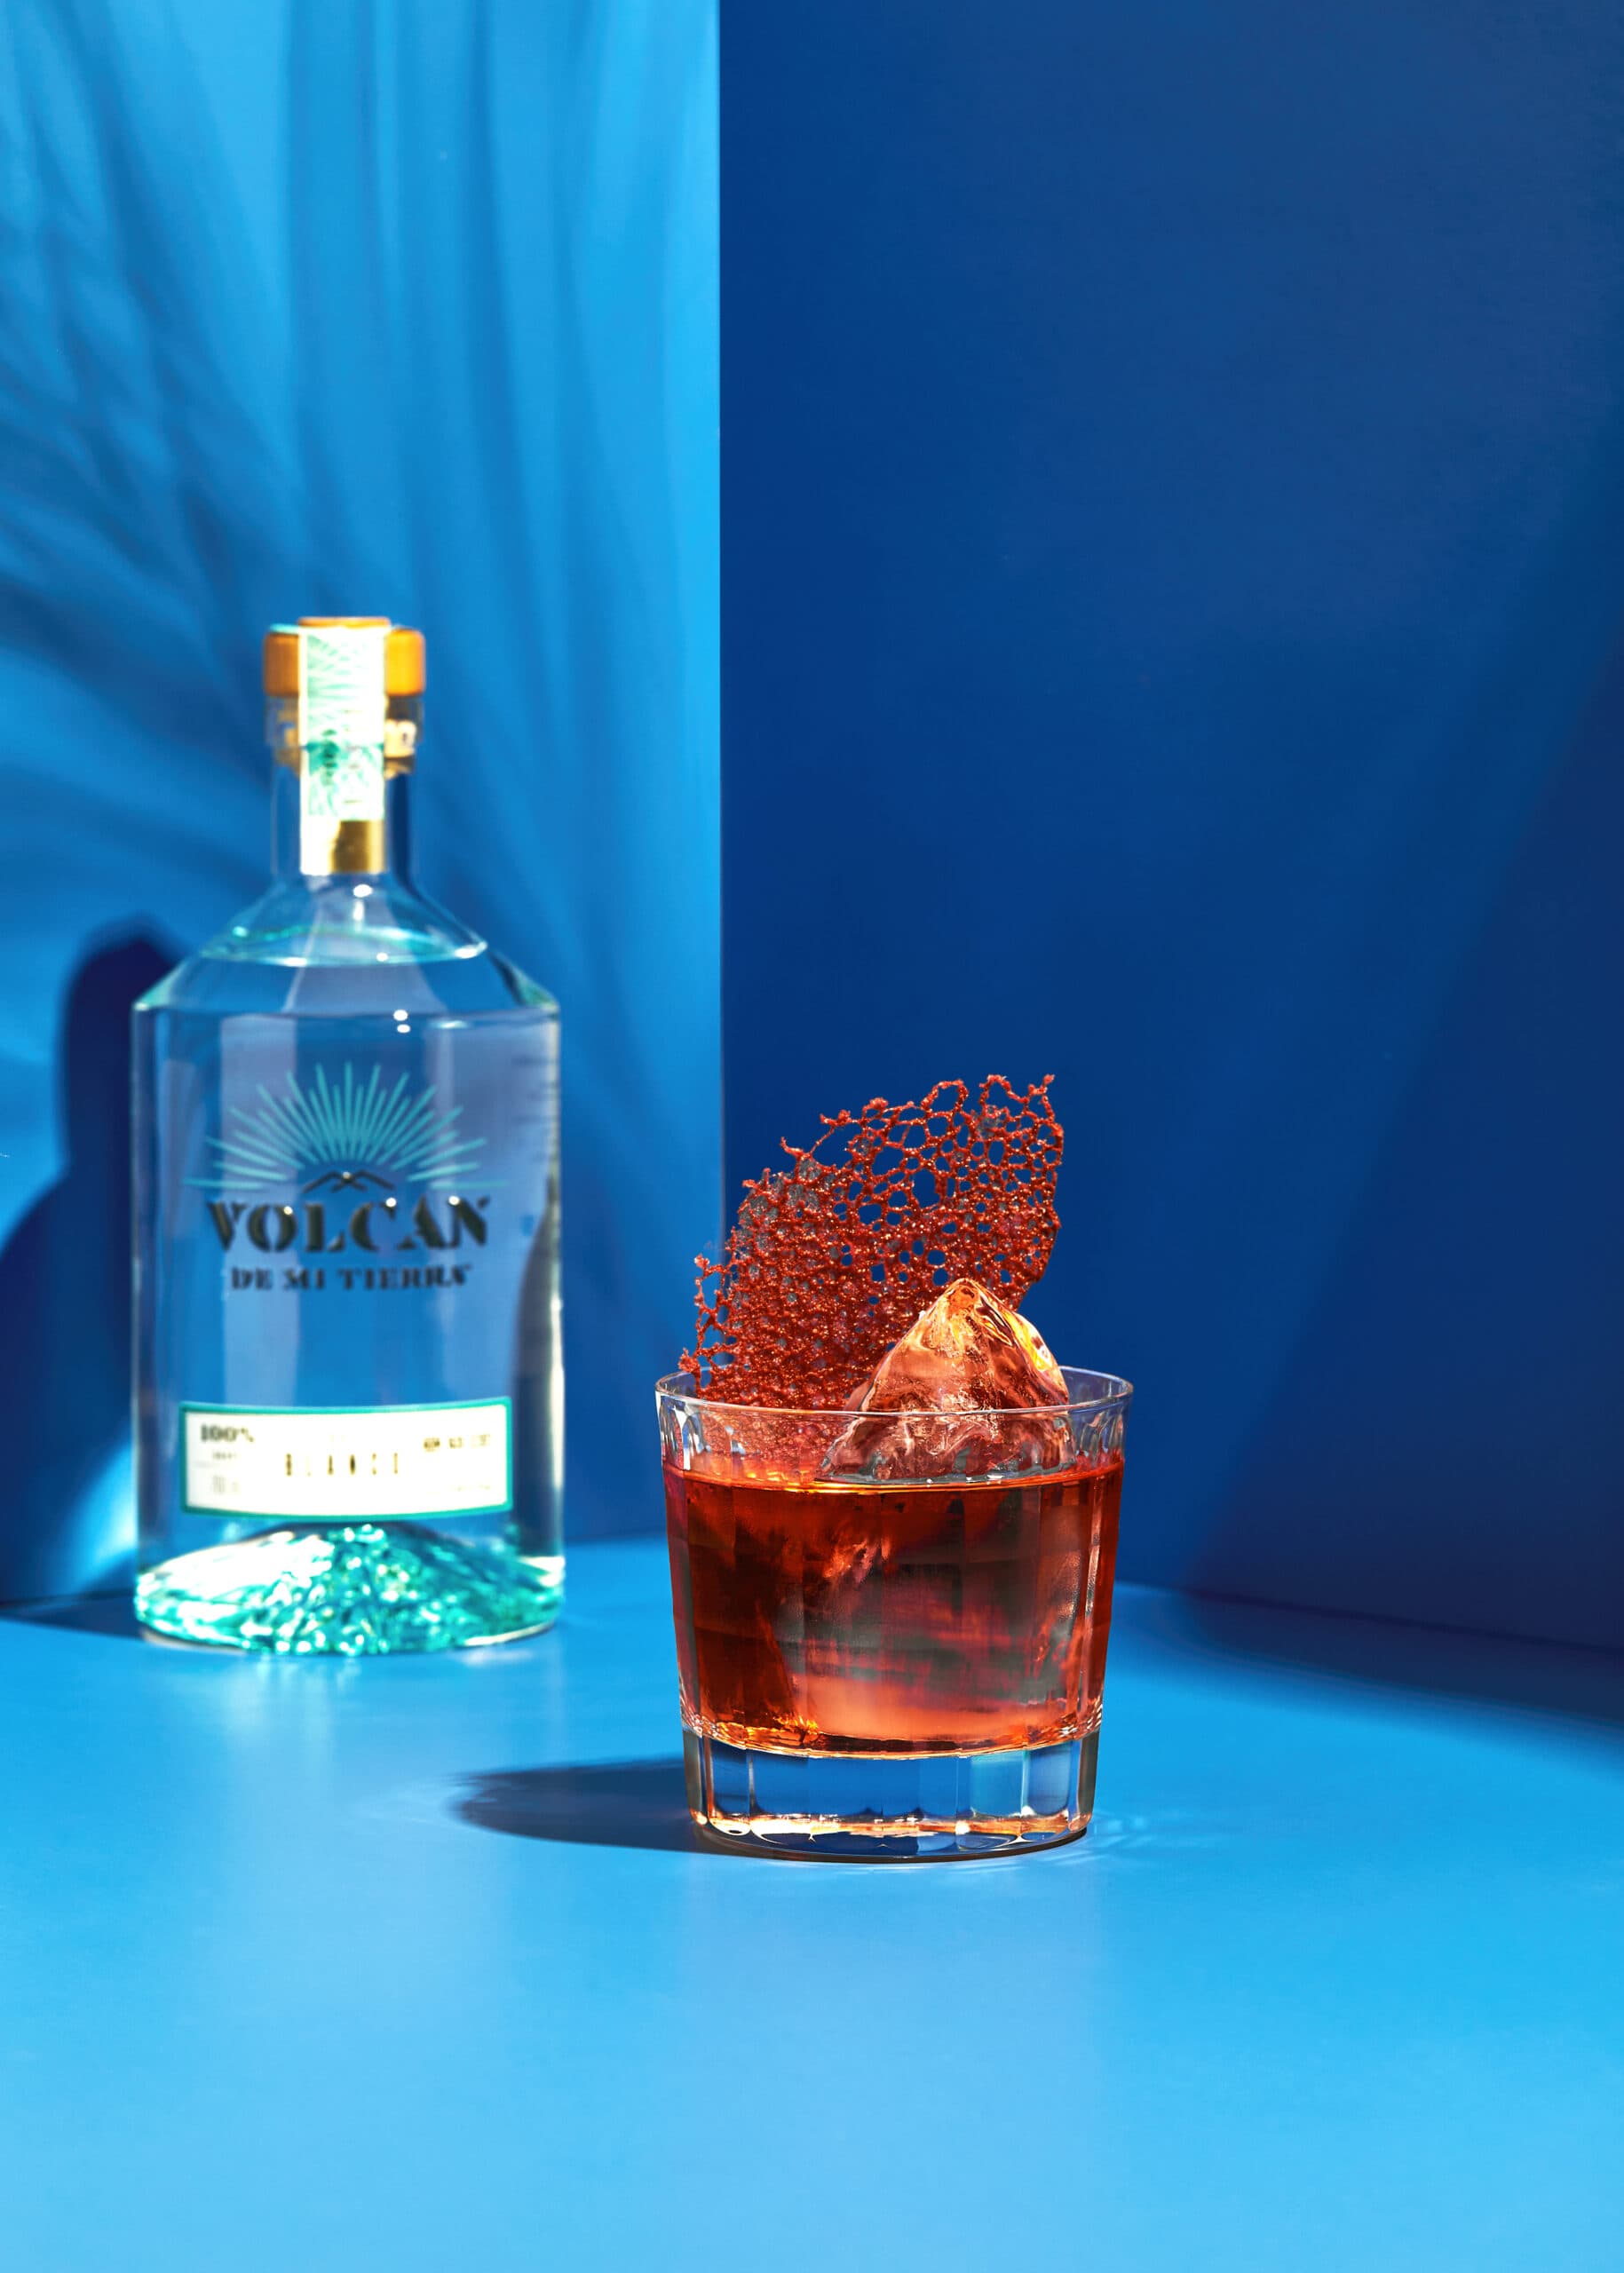 Mexican negroni with Volcan tequila bottle